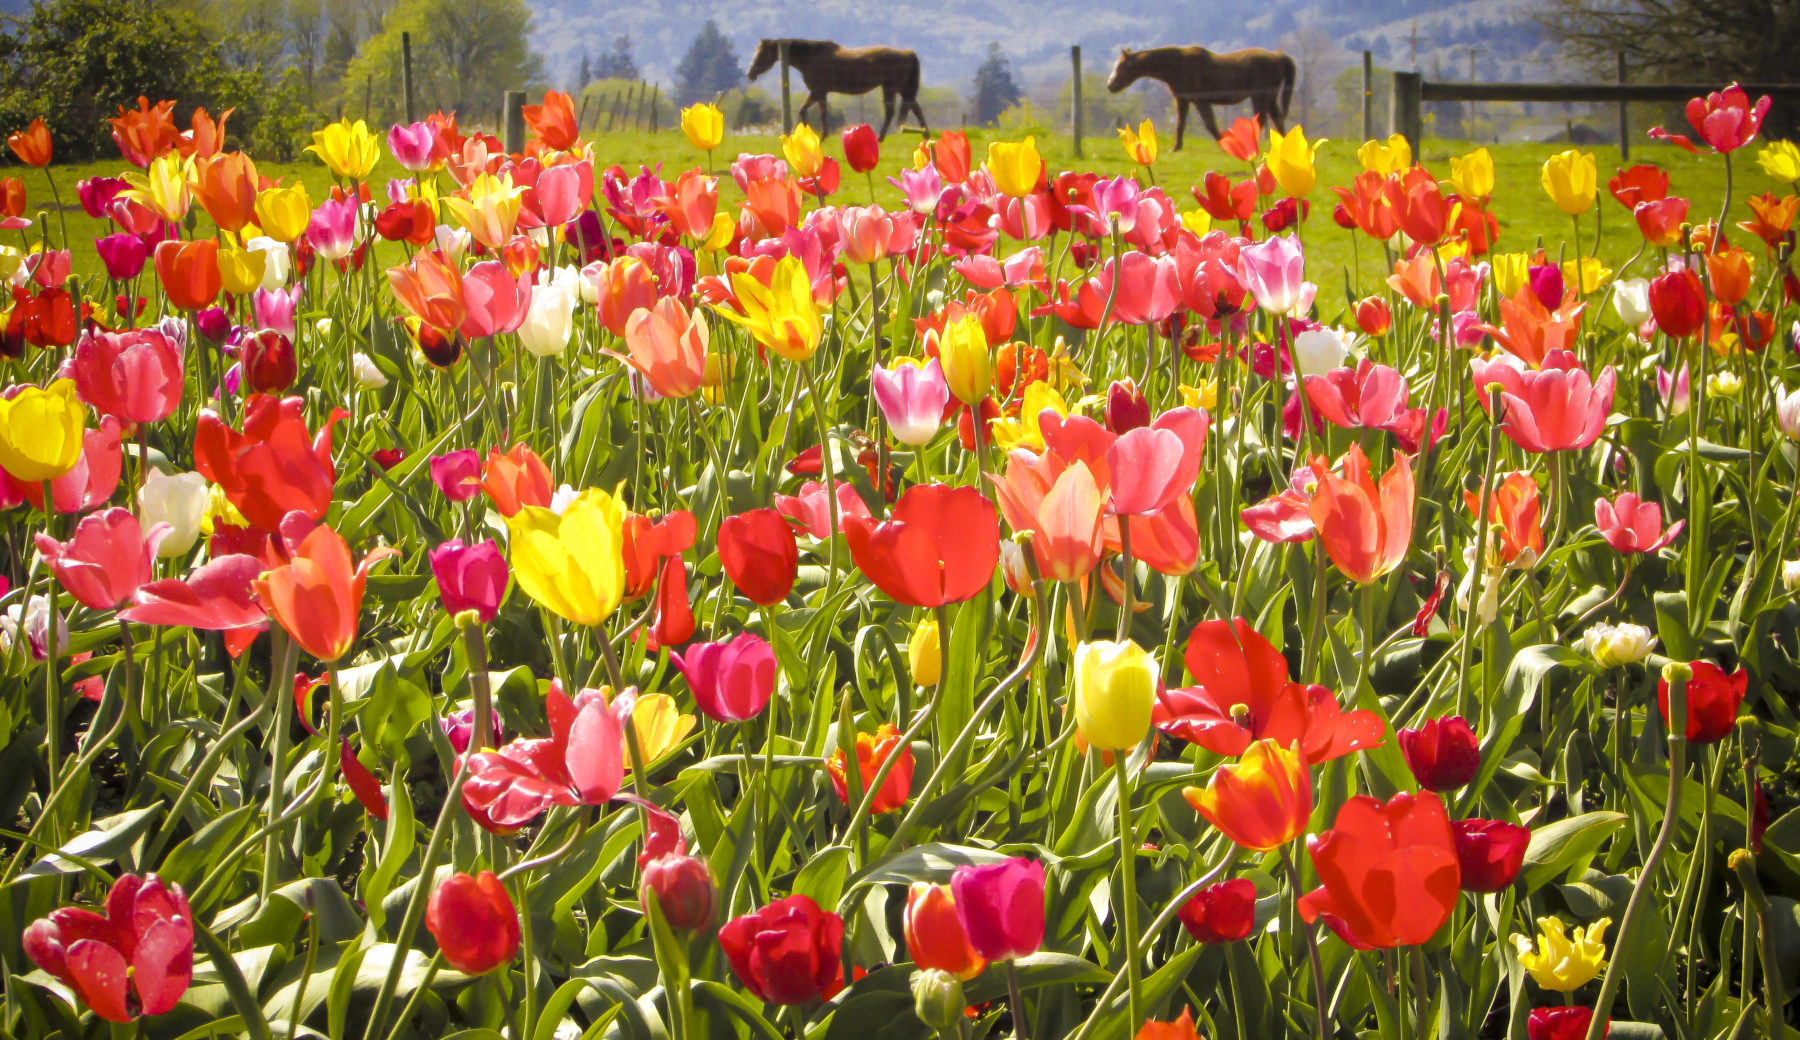 Photo of tulips blooming in a field and horses in the distance, by photographer Stephanie Lowe